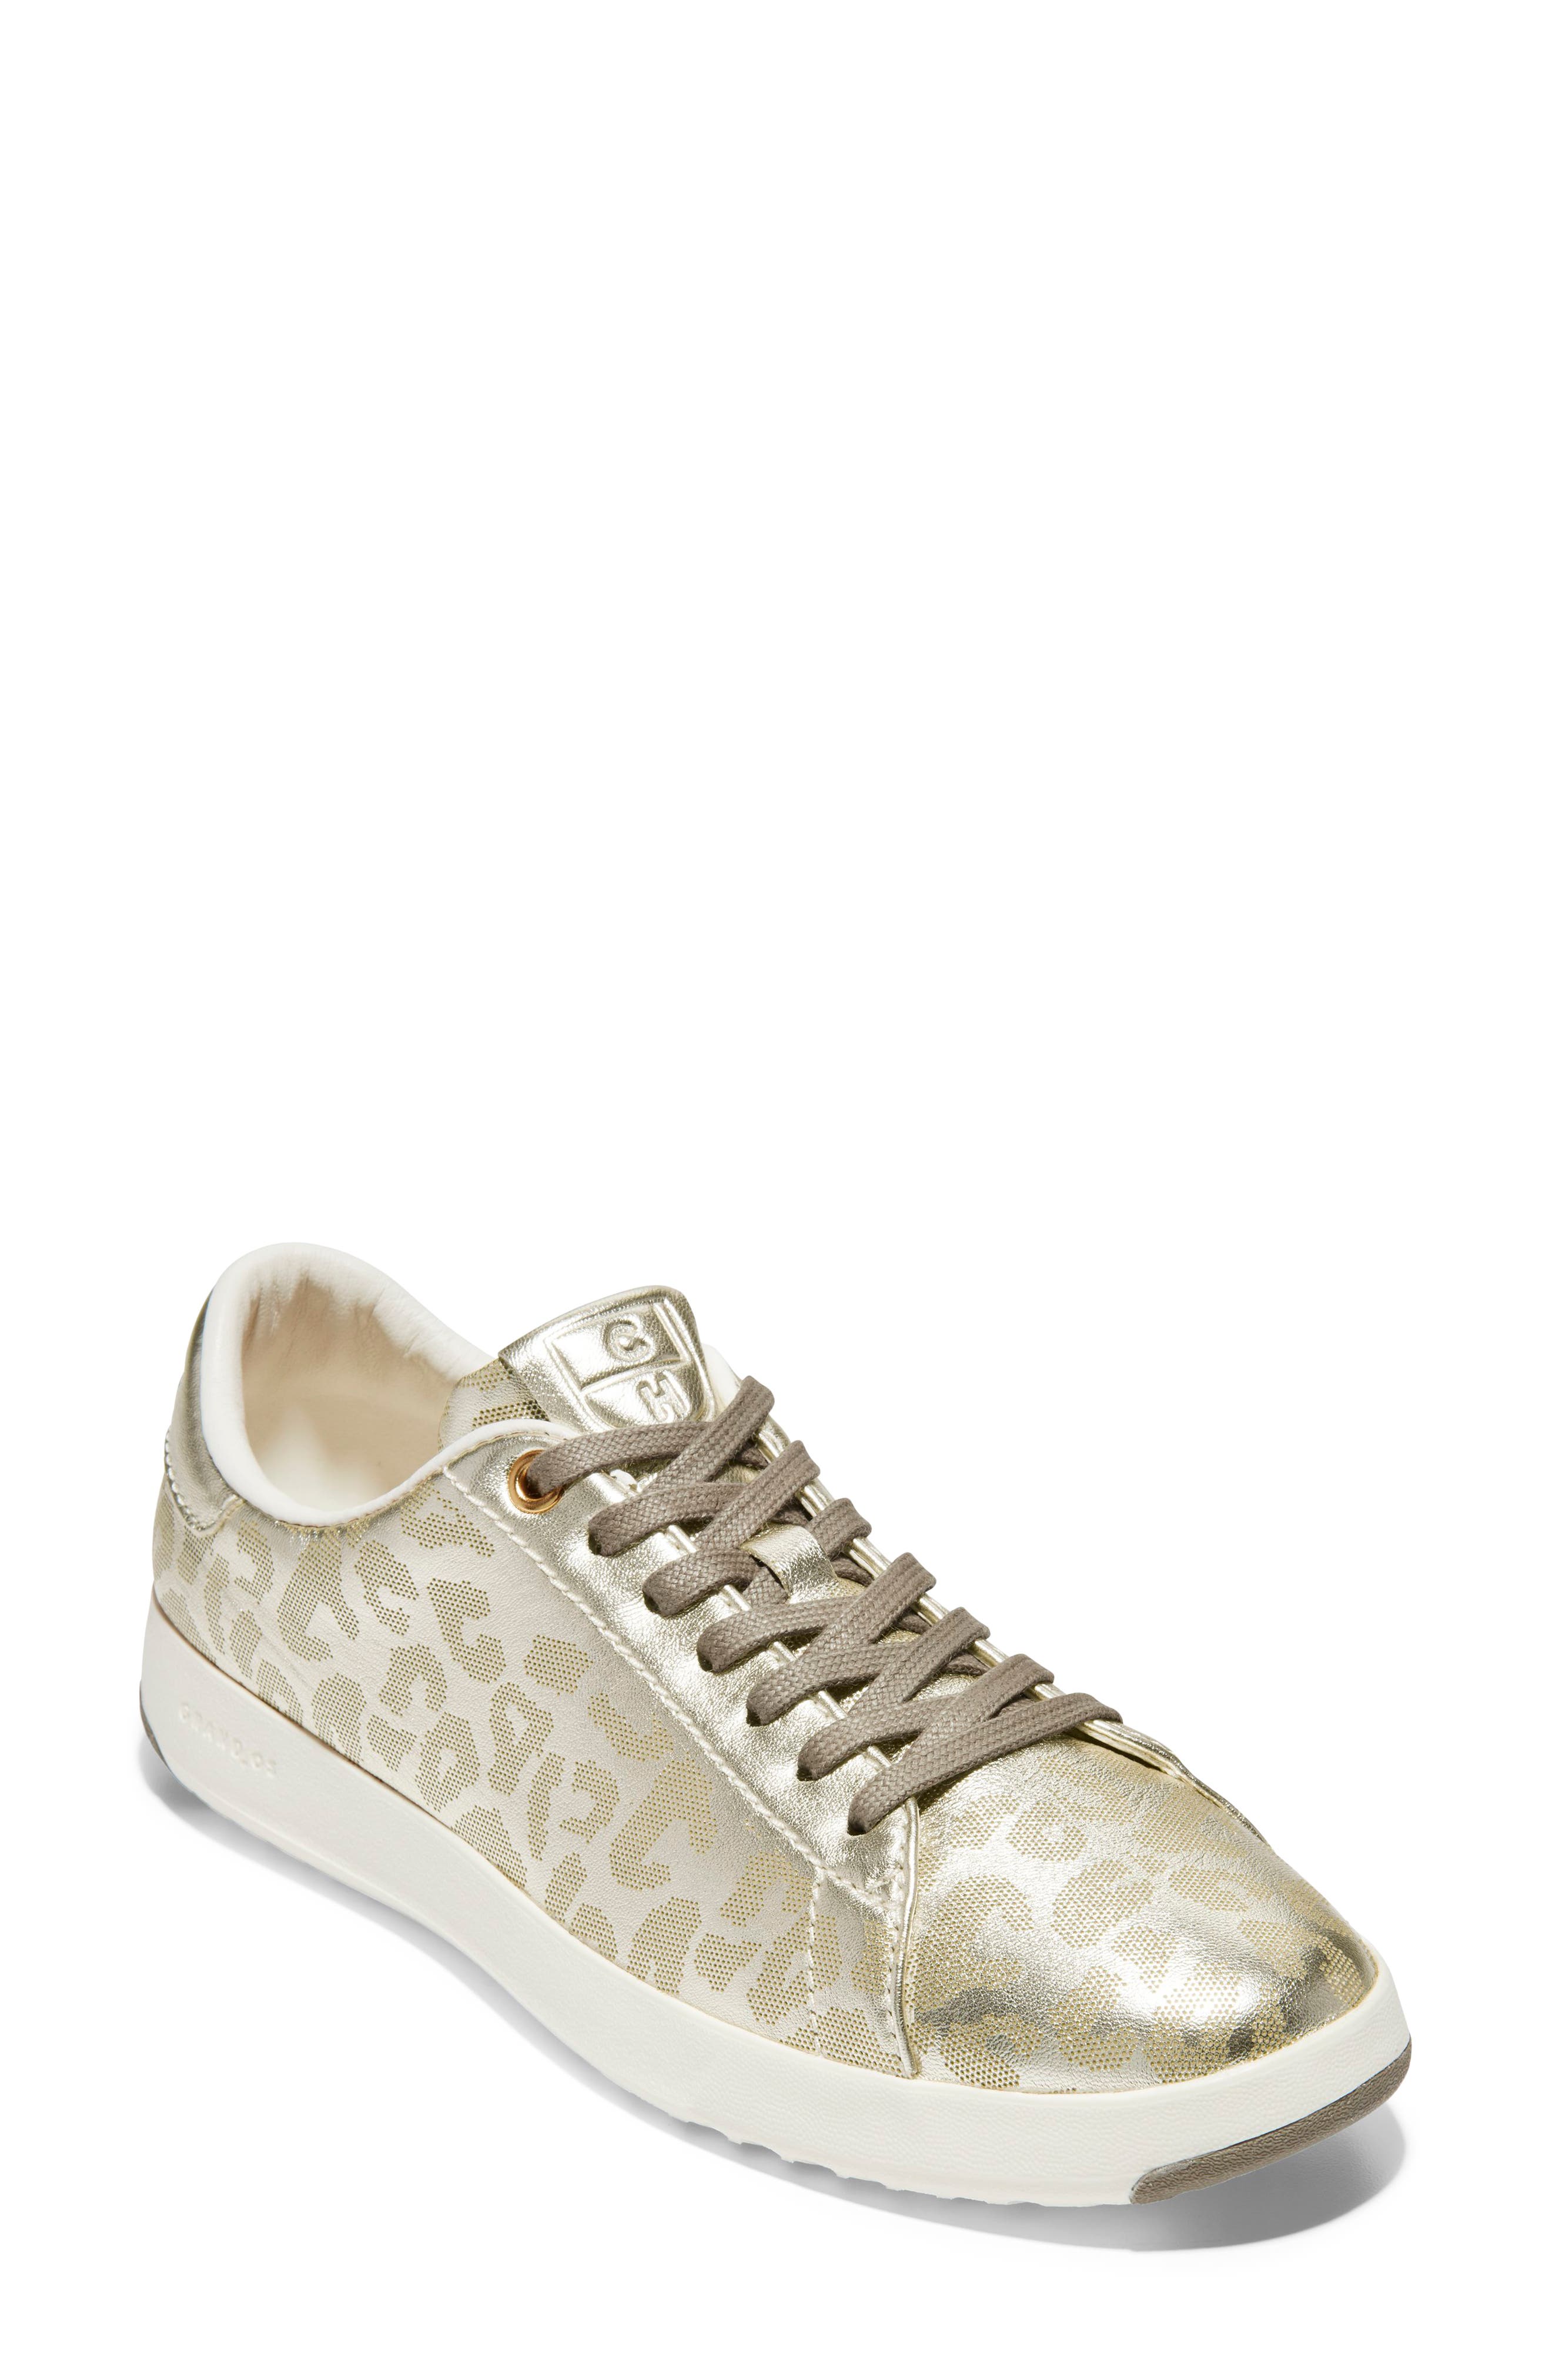 cole haan white sneakers nordstrom